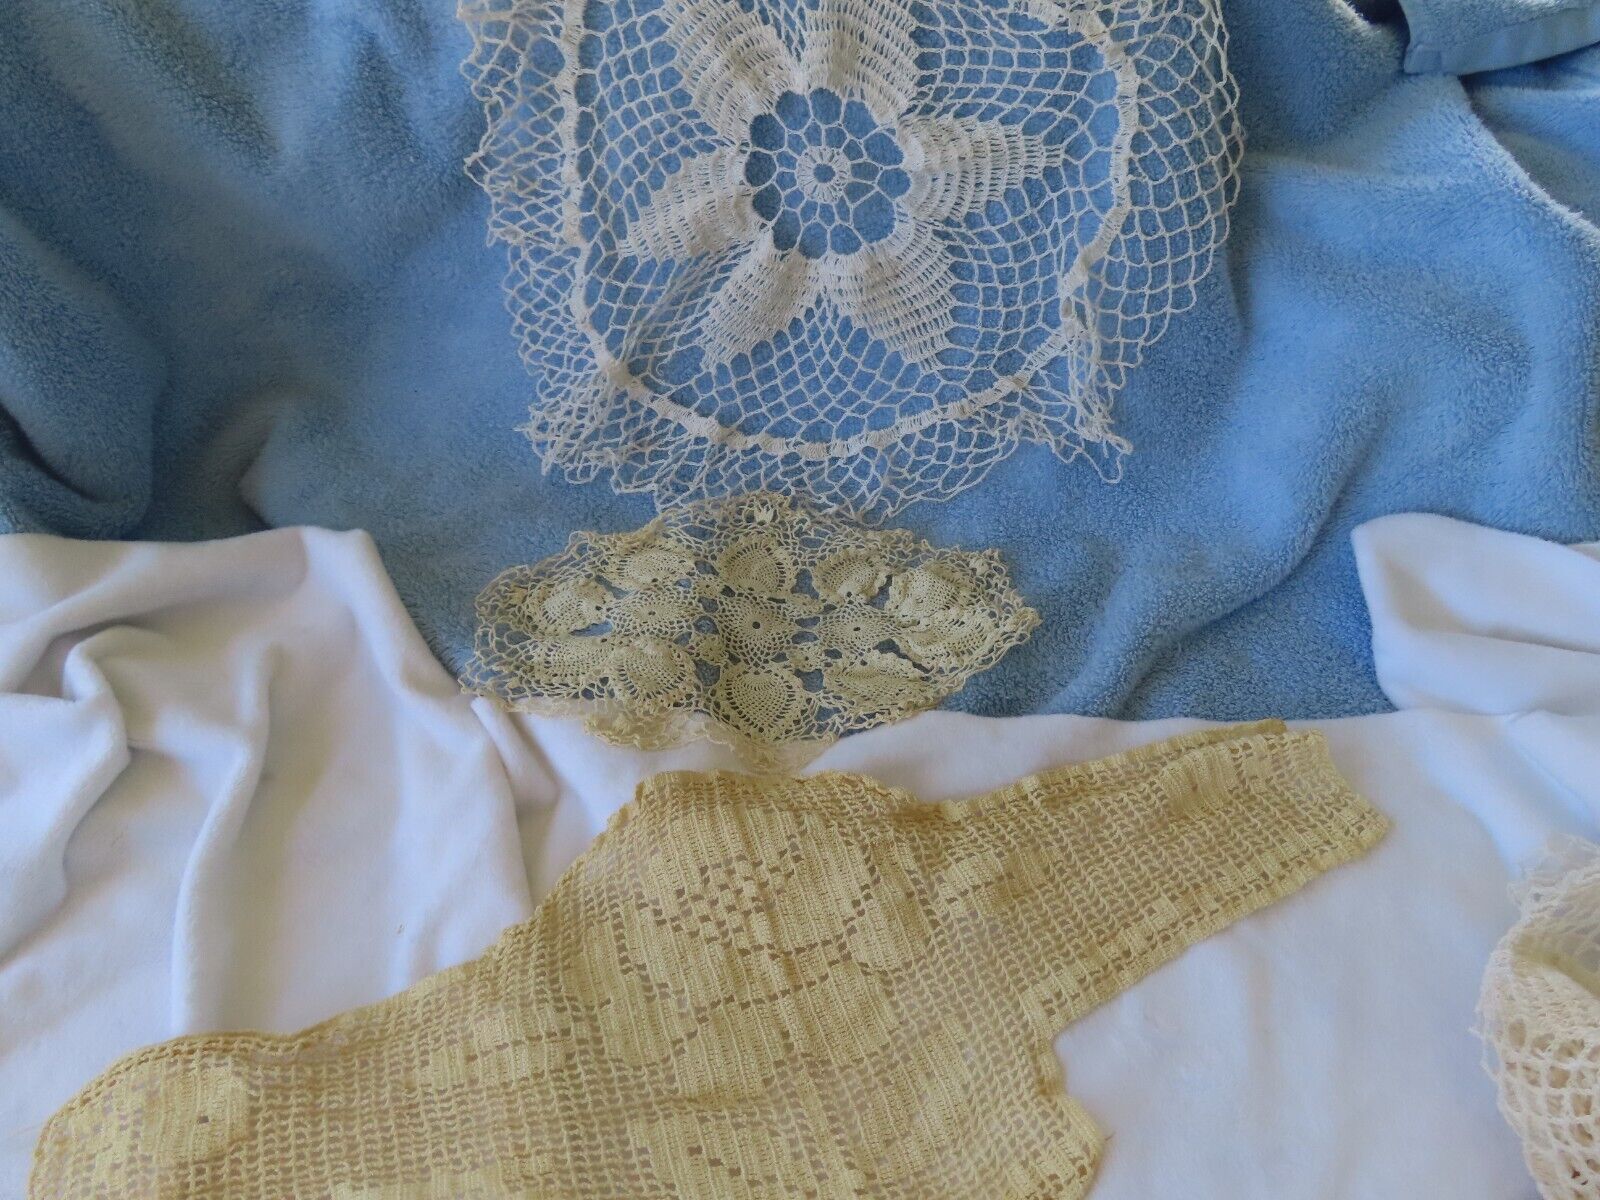 Mixed Lot of 3 Vintage Crocheted Doilies Cream & White EXCELLENT